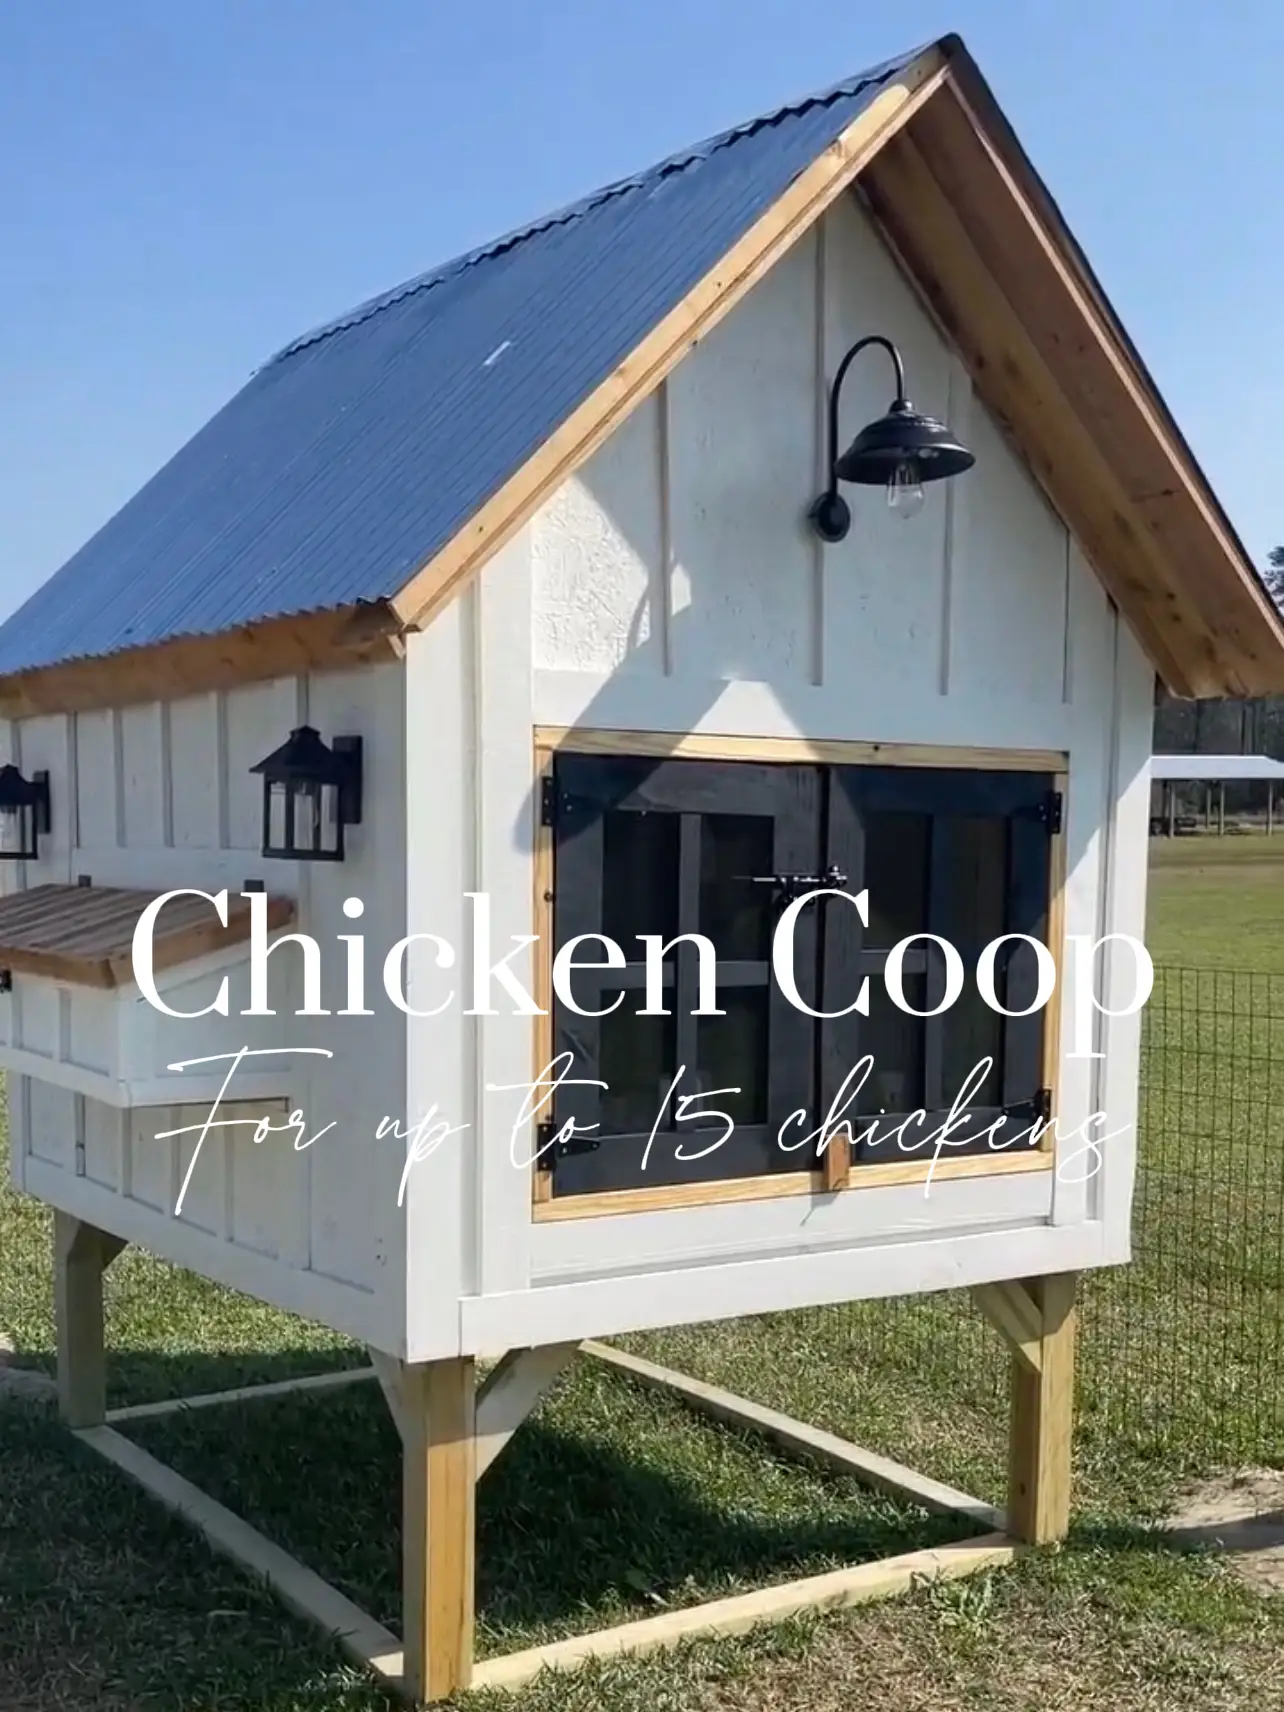 How To Make A Chicken Coop With Pallets: Model SiSi